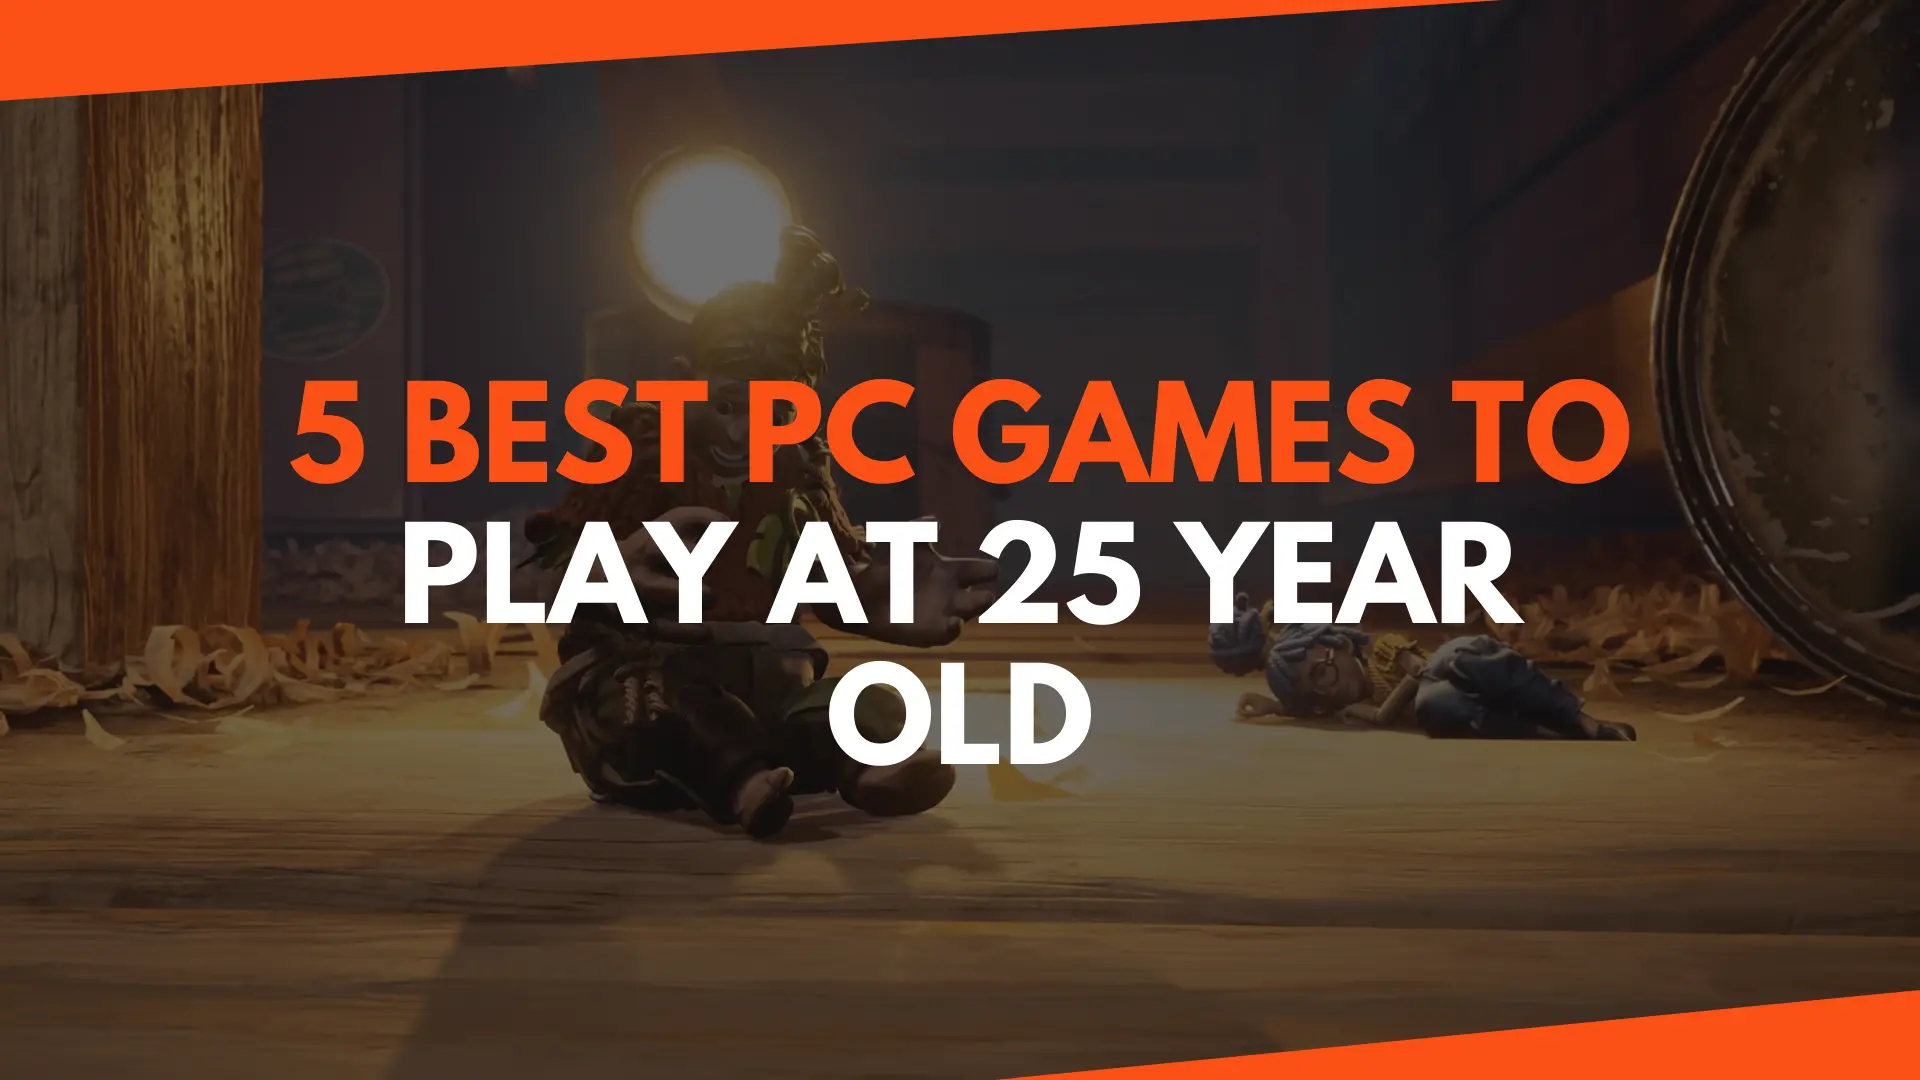 5 Best PC Games To Play At 25 Year Old